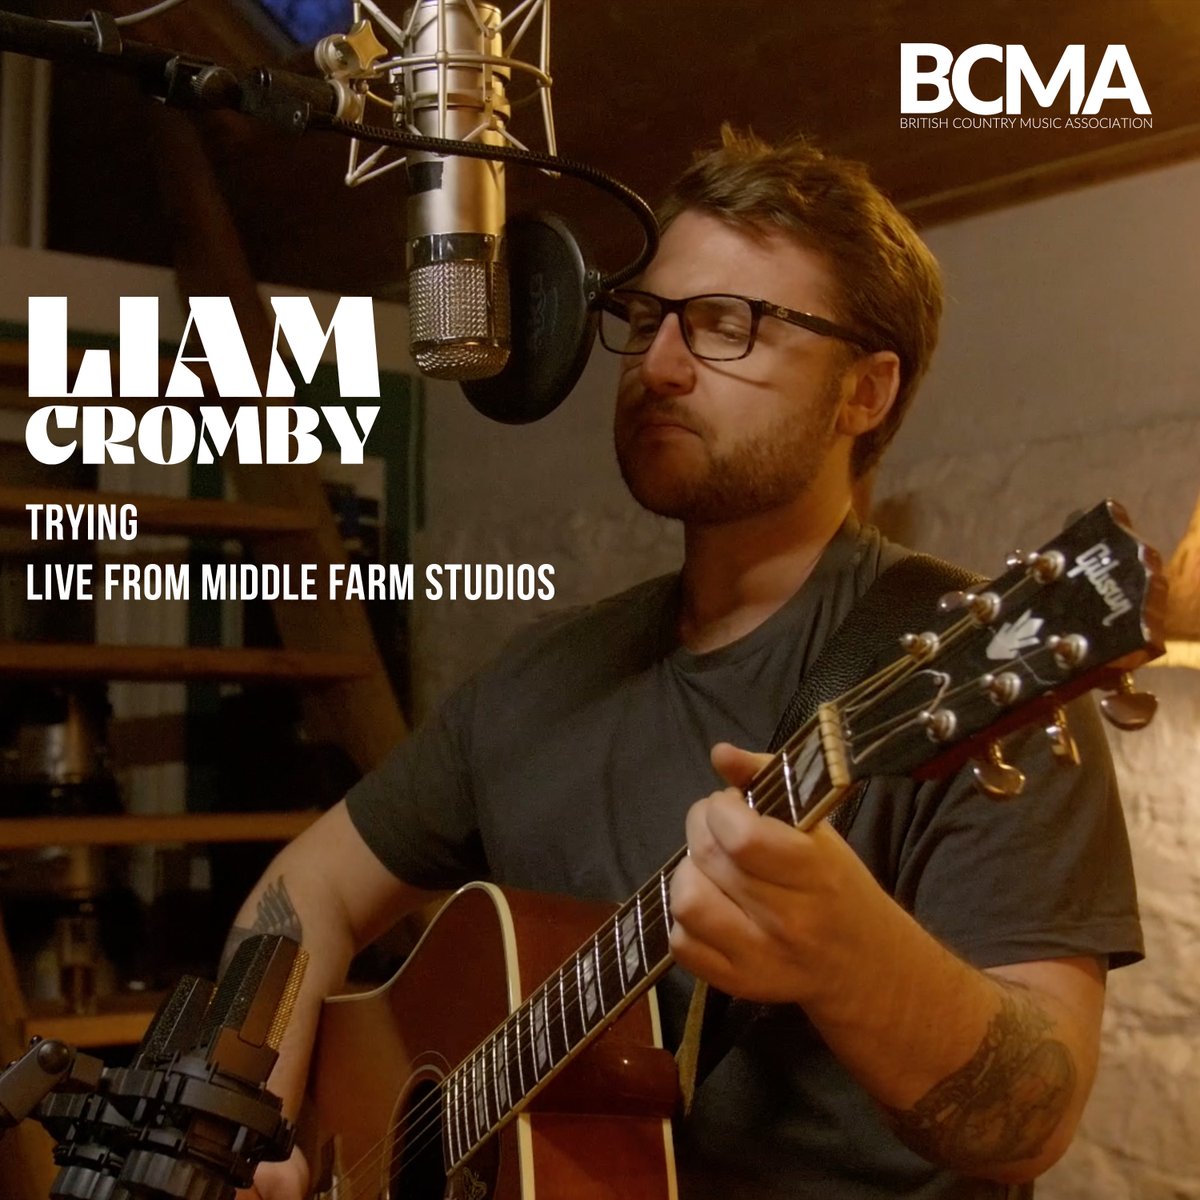 Hello everyone! The wonderful people over at @britishcma British Country Music Association are premiering my new video right now over on their Facebook page - this is a live in the studio video of me recording the actual album take of 'Trying'.